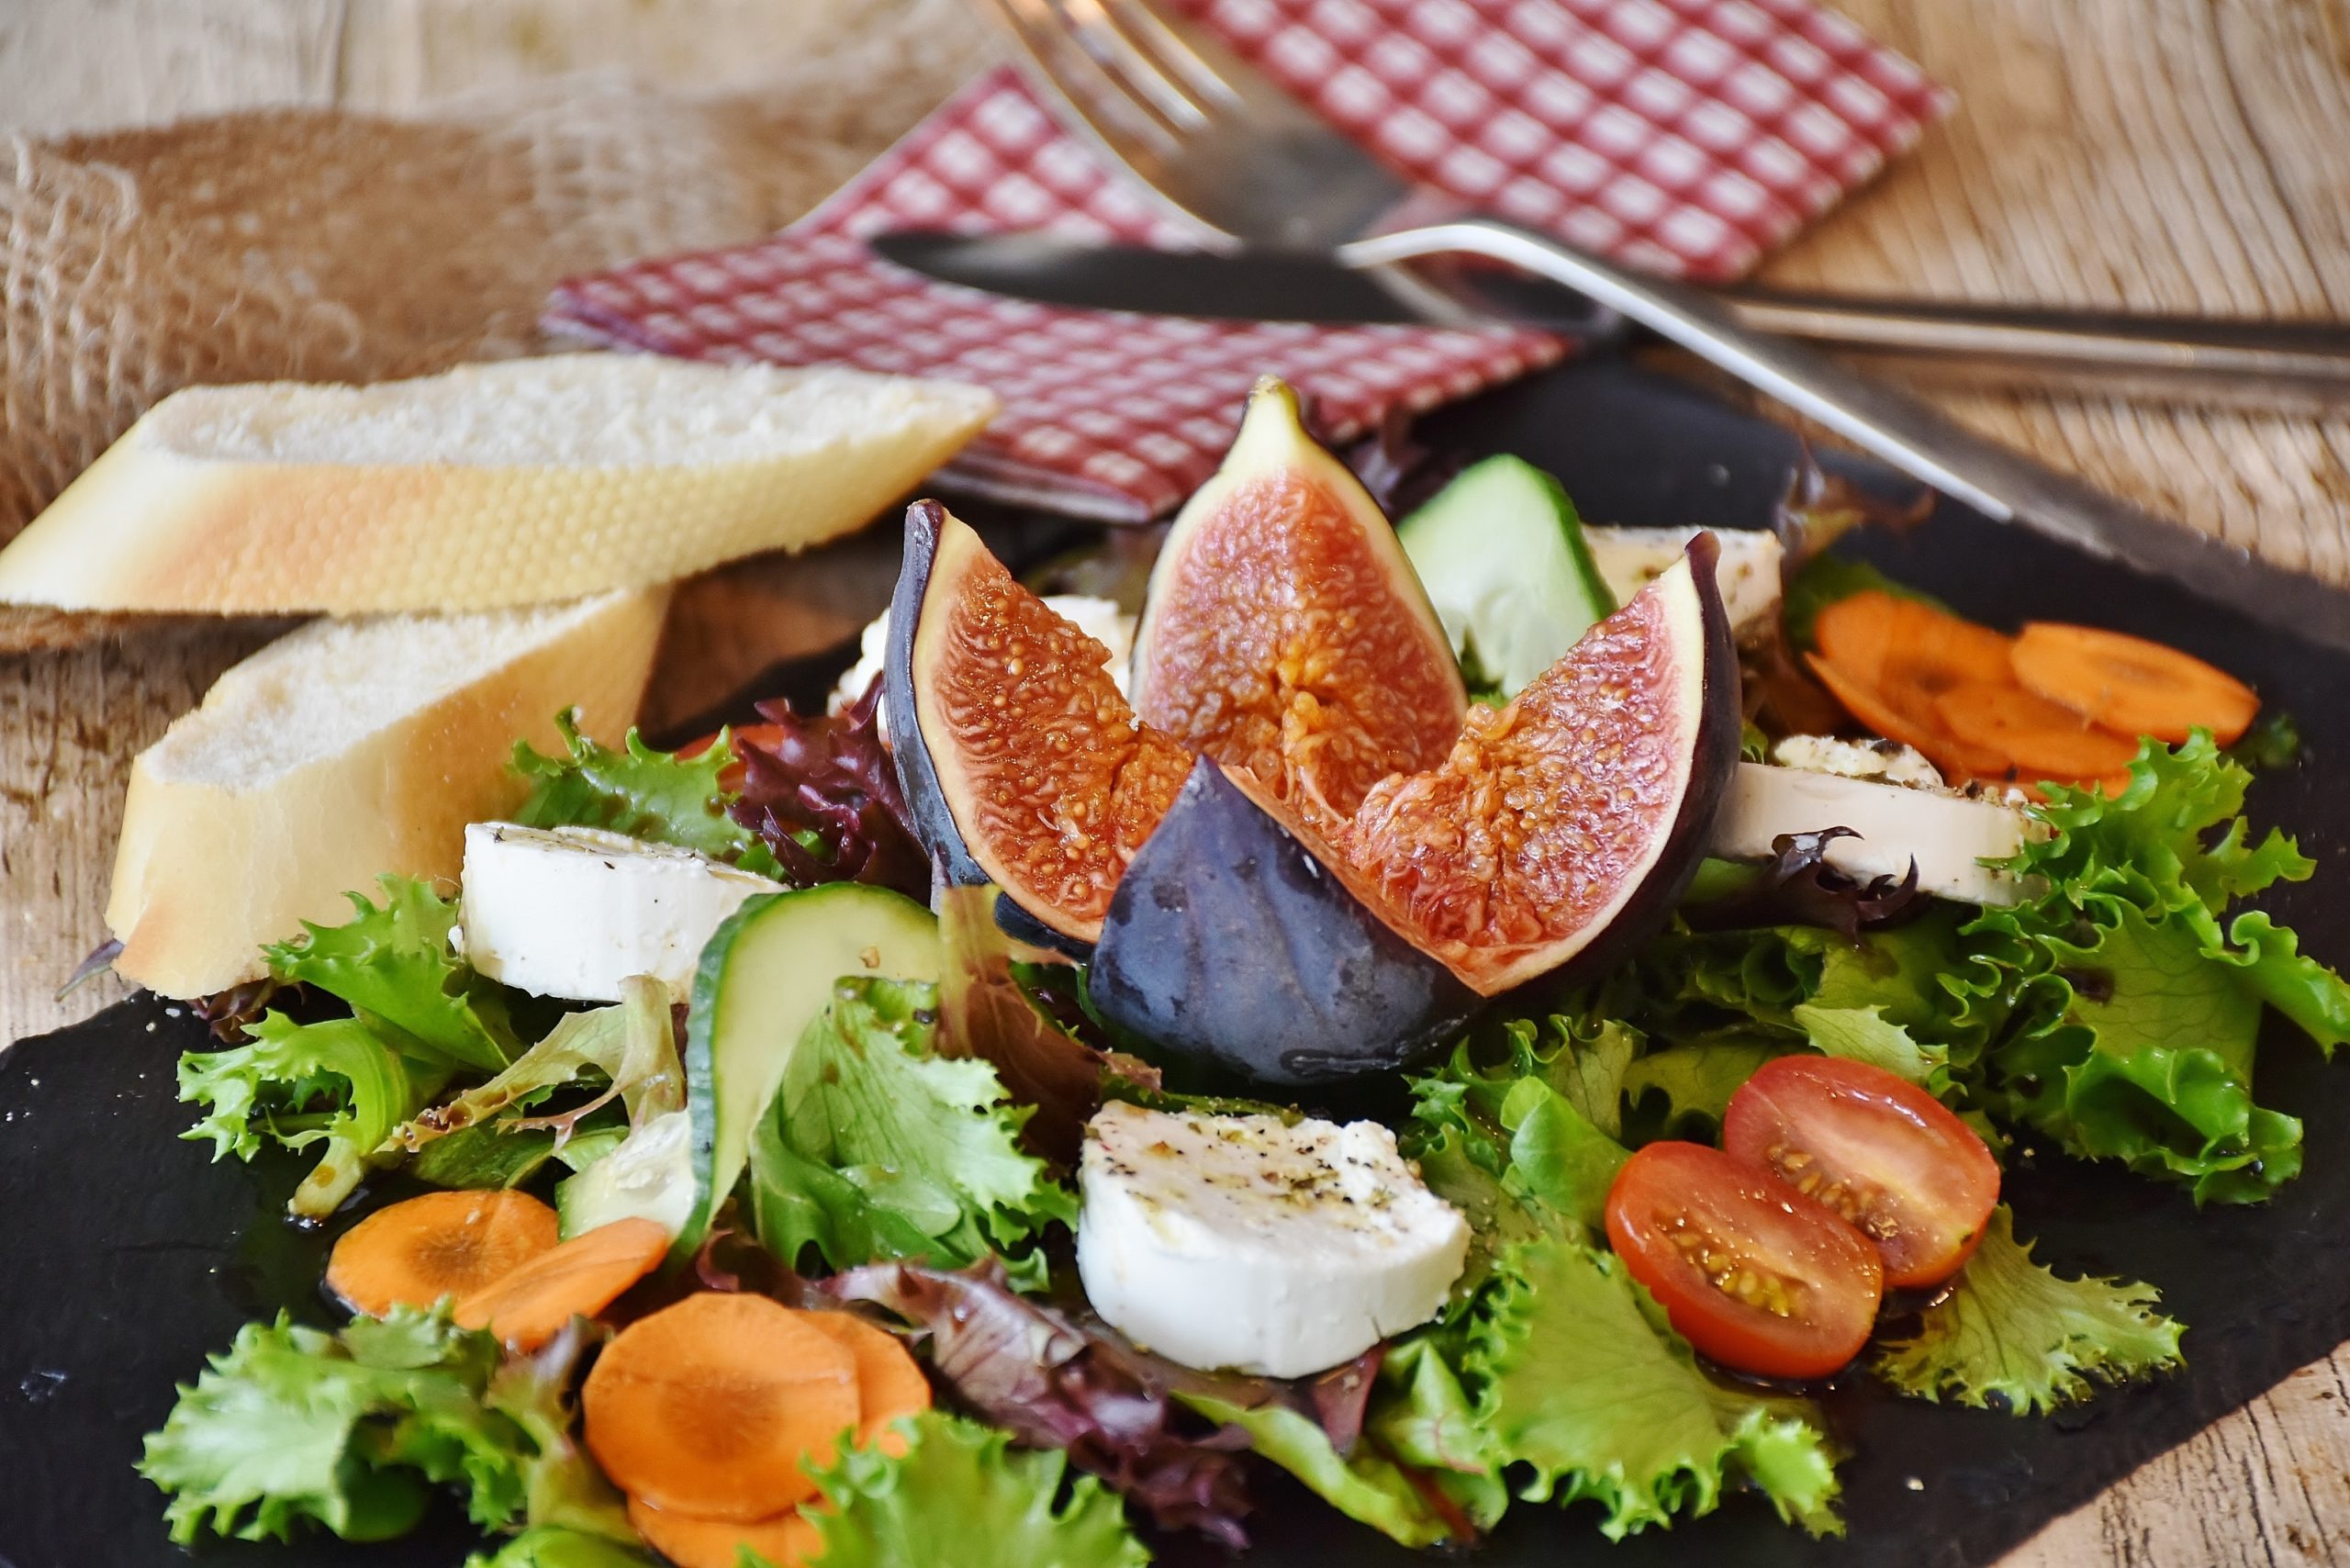 appetizer dish containing a fig, tomatoes, cheese and lettuce